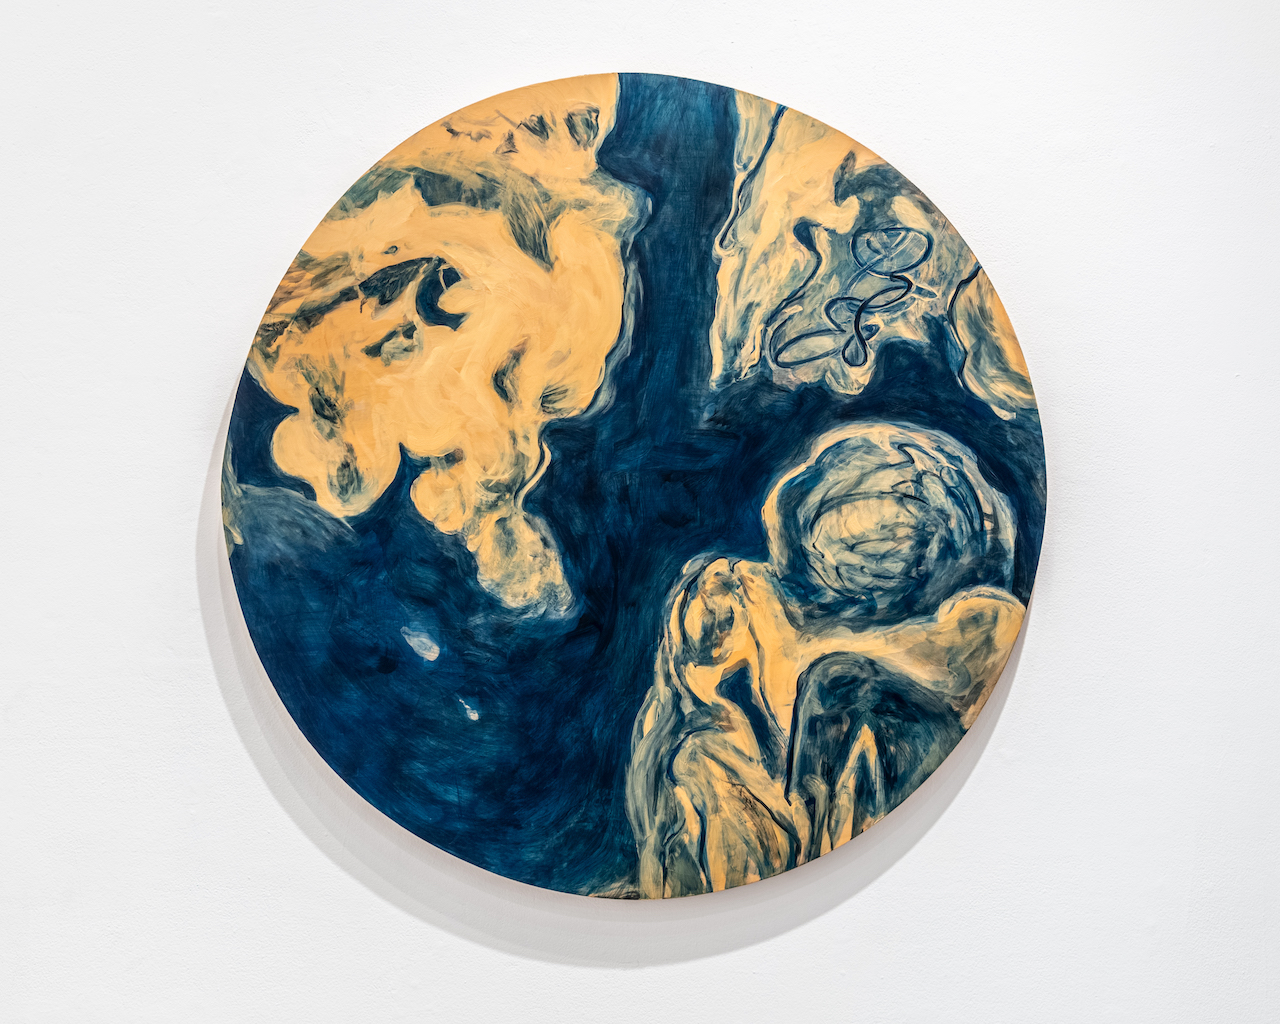 An abstract tondo (round painting) in cyanotype blue and sand. Almost looks like a planet, with the "continents" being feminine bodily shapes, golden sand in color with blue swirls.